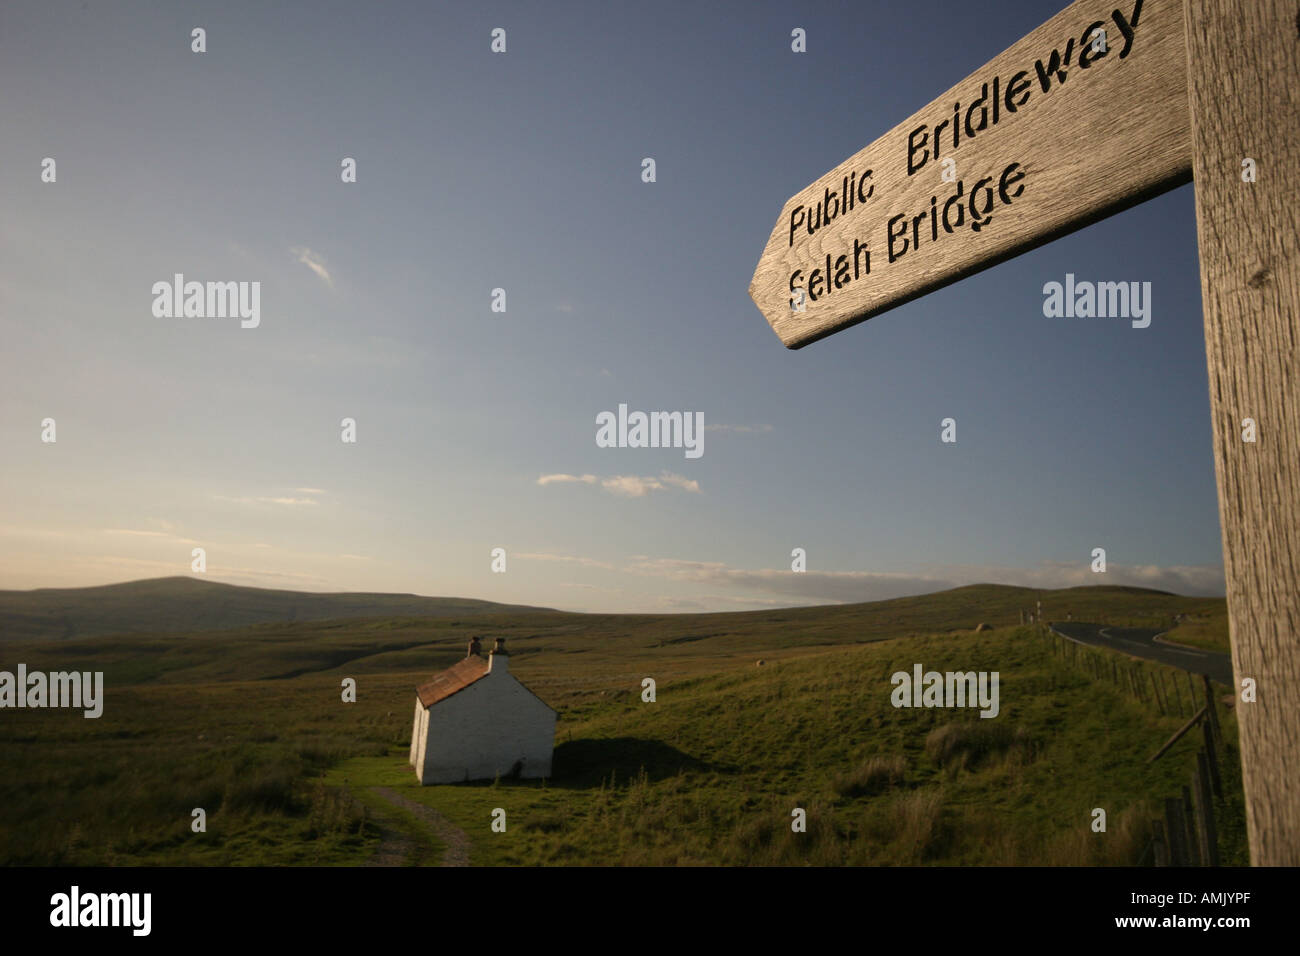 A Stock Photograph of a Sign for a Footpath and a House on top of the Pennines in Cumbria UK Stock Photo